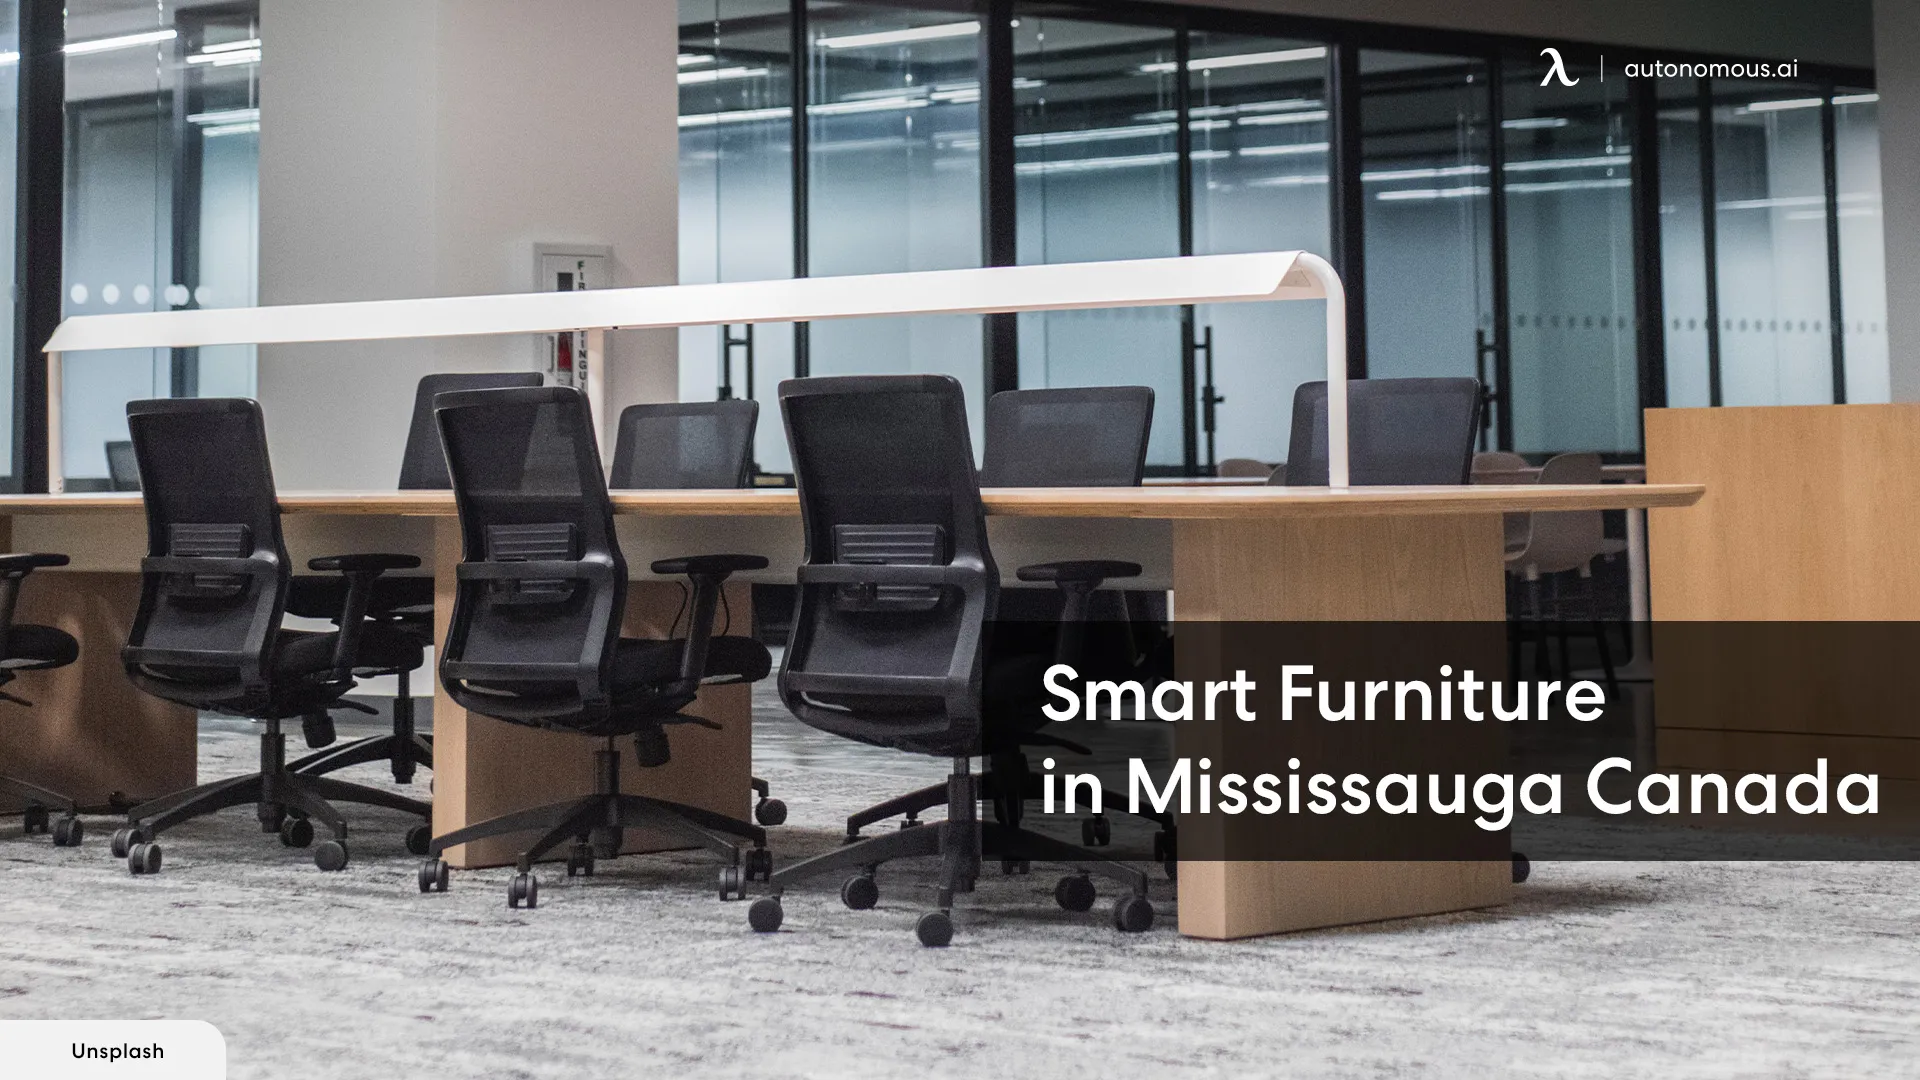 Transform Your Workspace with Smart Furniture in Mississauga, Canada